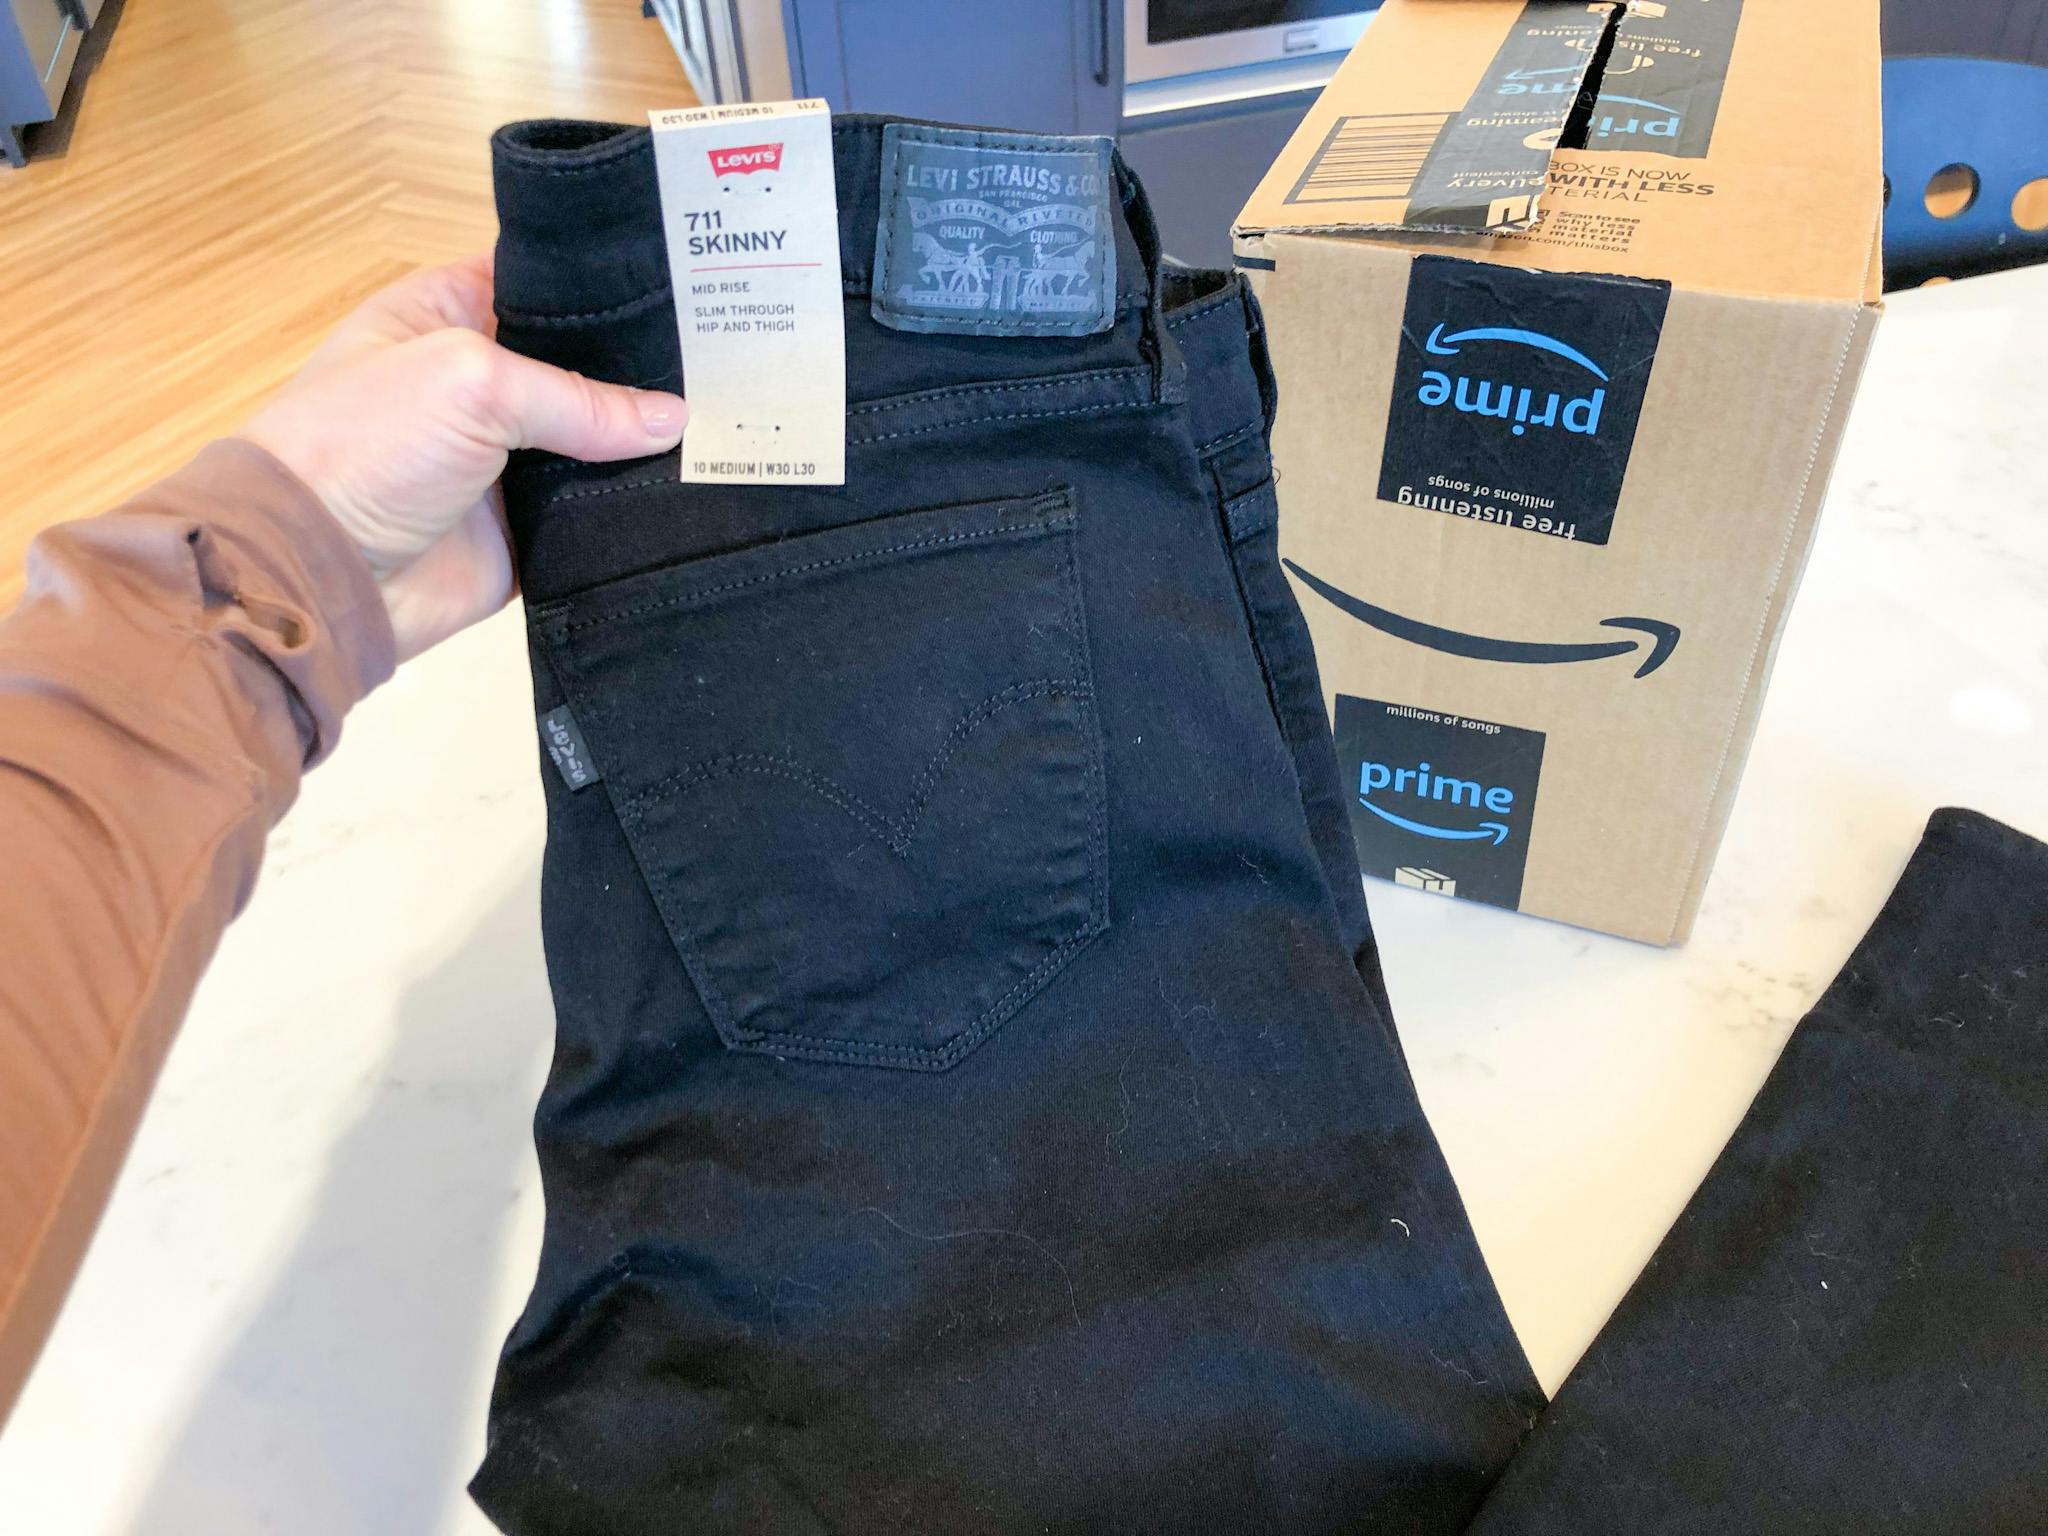 Namaak Accountant Ophef Denim Deals — Hidden Sale on Levi's Jeans, Starting at $20.99 on Amazon -  The Krazy Coupon Lady